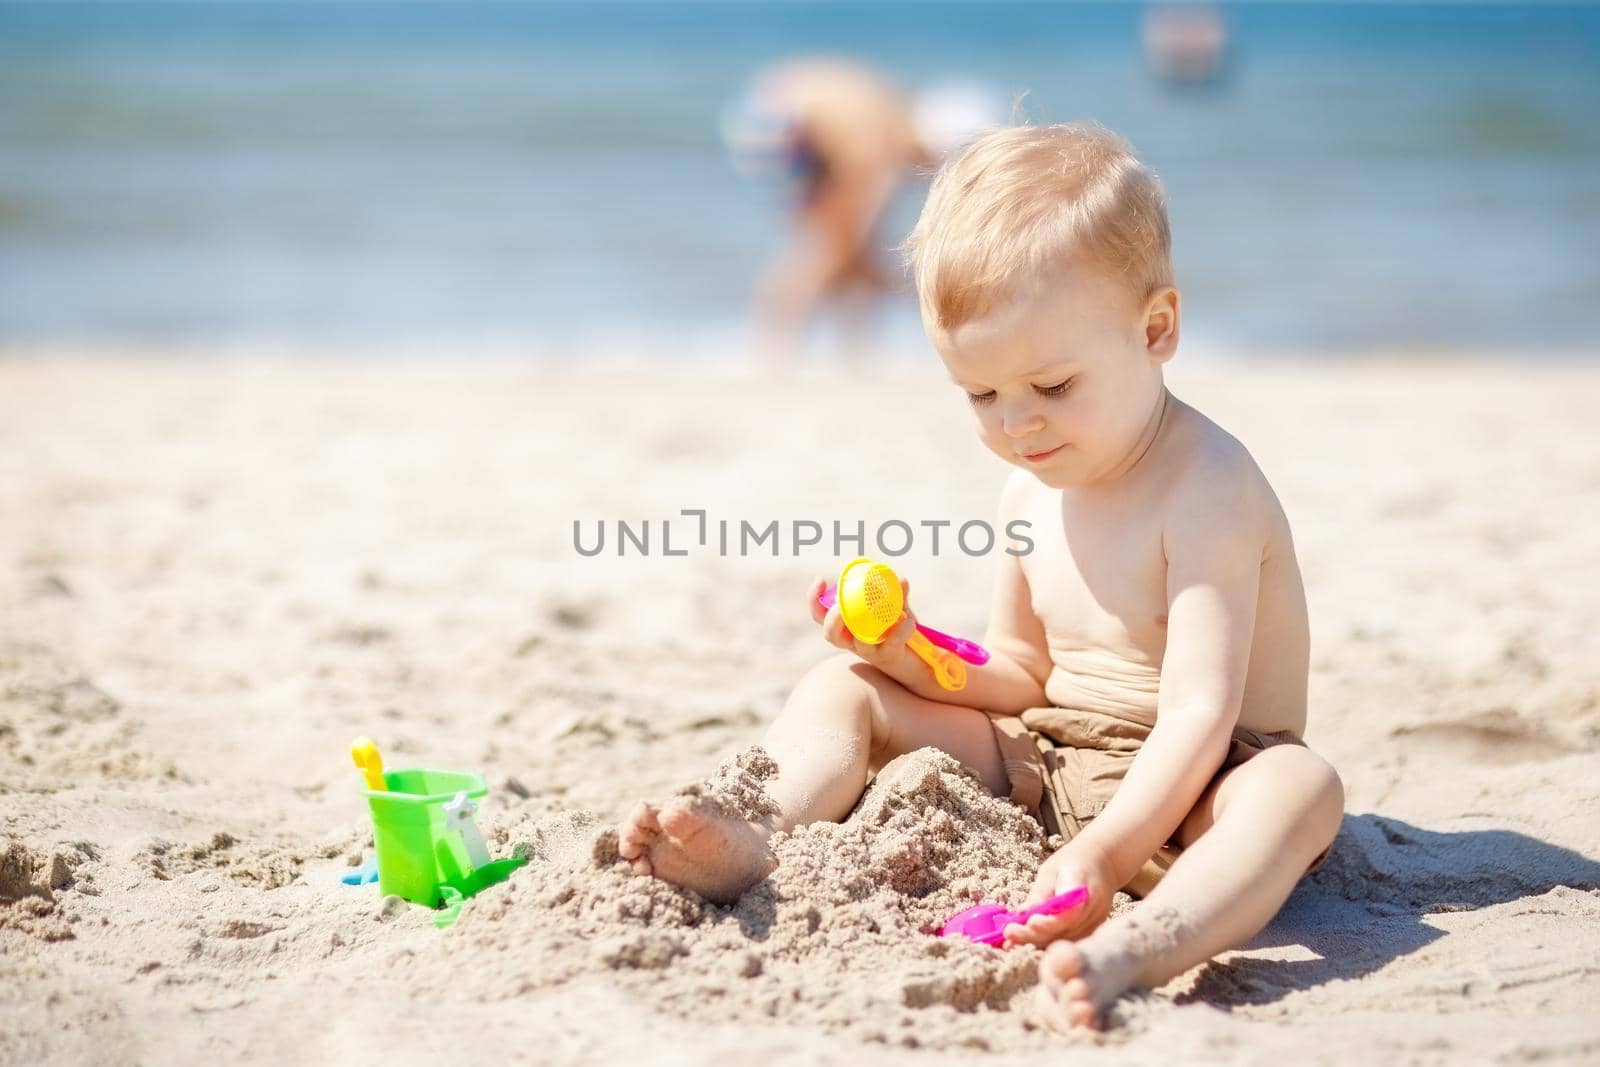 Kid playing on beach with sand. Sand and water toys. No sun protection for young child. Little boy digging sand, building castle at sea shore.